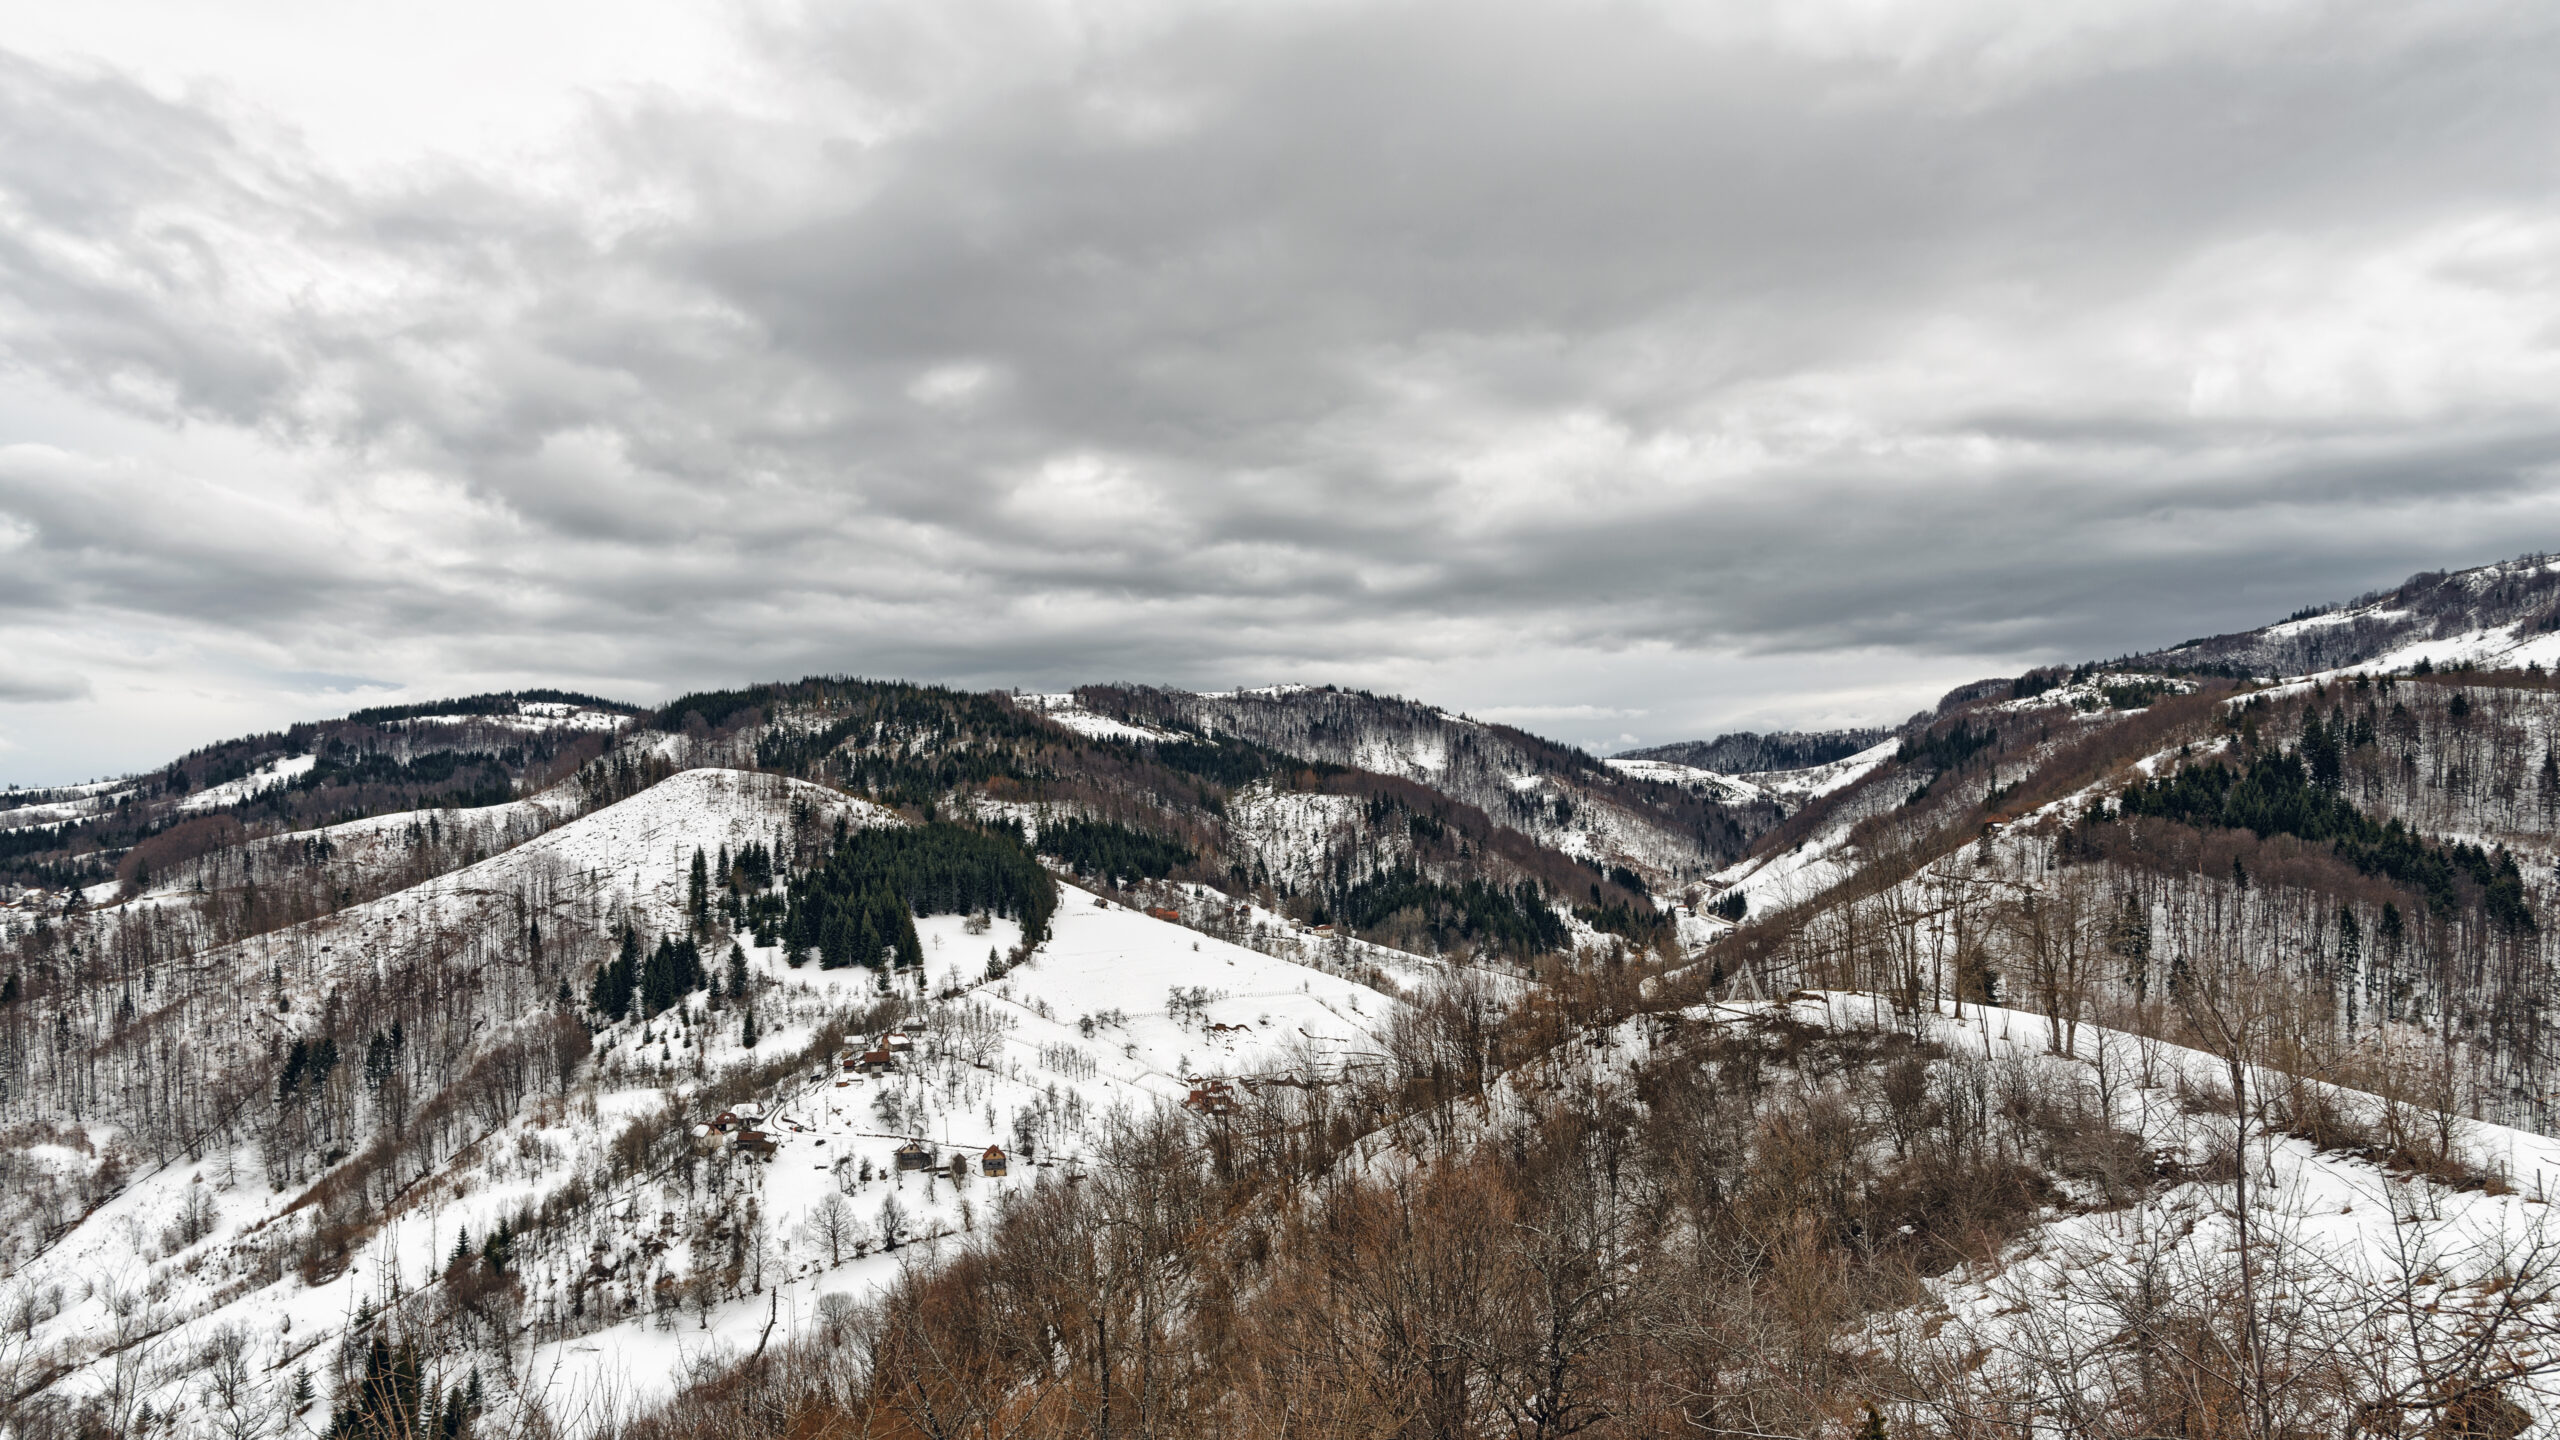 Mountain Zlatibor, Serbia at winter. Beautiful landscape in winter, a snow-covered mountain, dramatic cloudy sky.